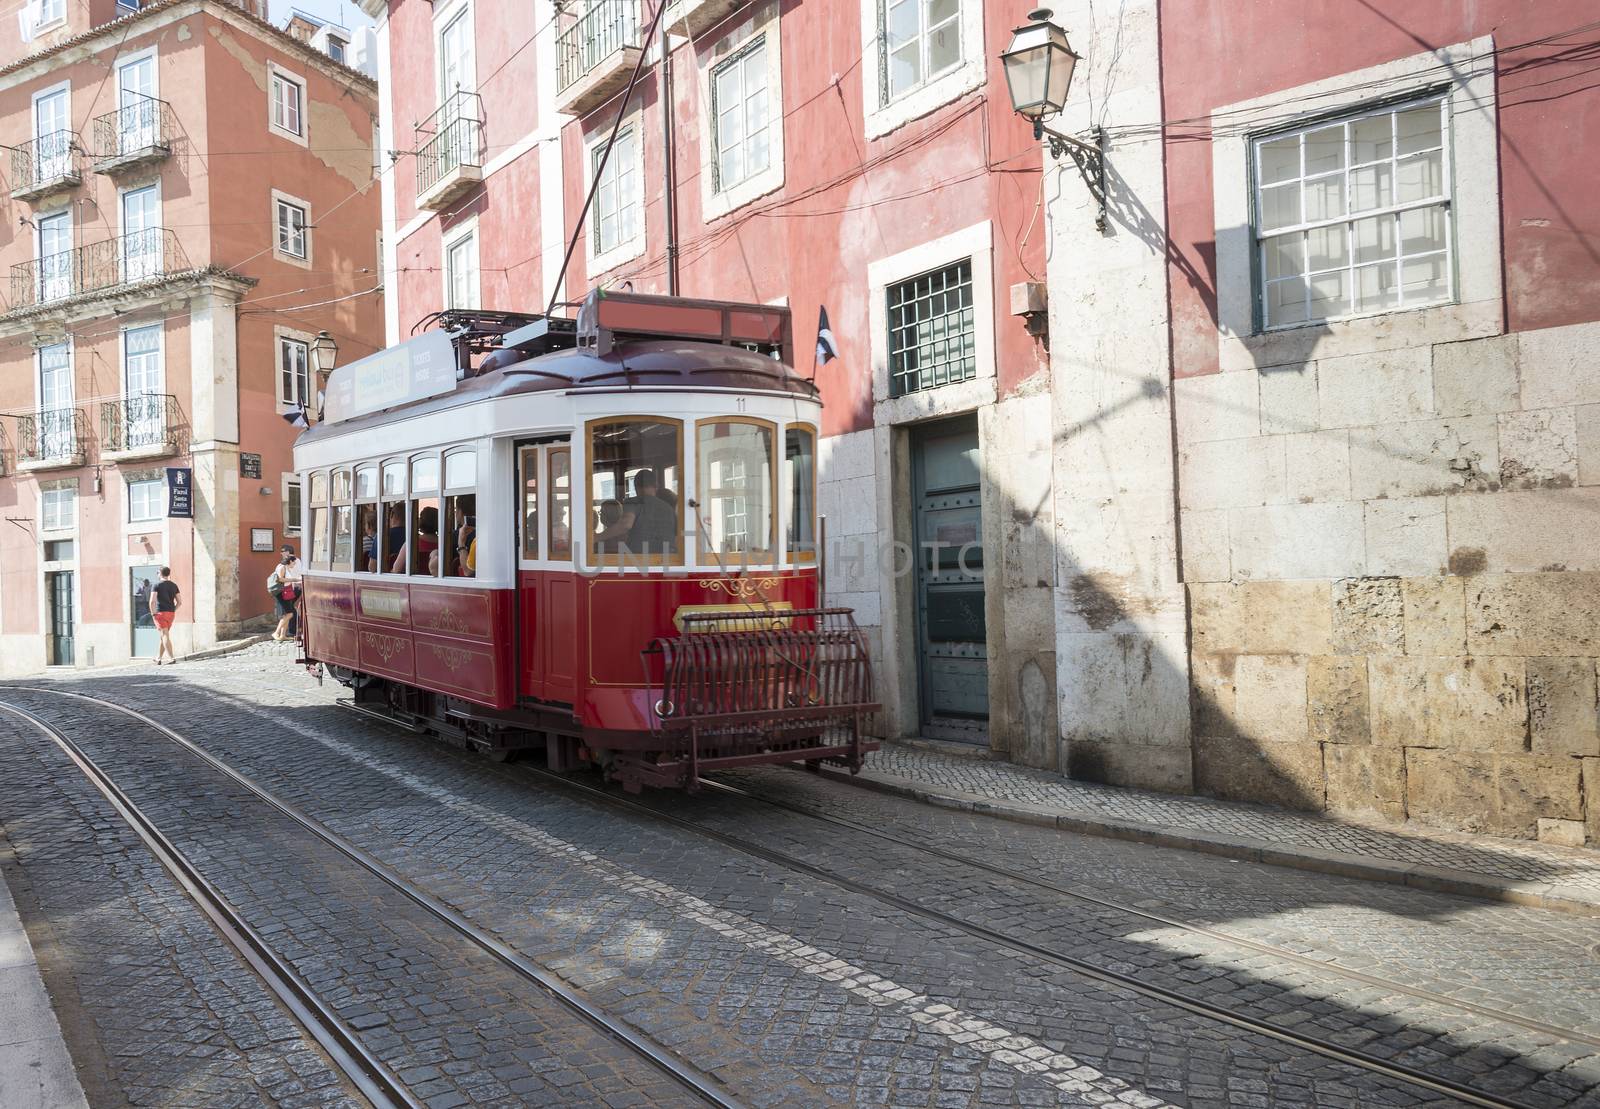 LISBON, PORTUGAL - SEPTEMBER 26: Unidentified people sitting in the red tram  goes by the street of Lisbon city center on September 26, 2015. Lisbon is a capital and must famous city of Portugal